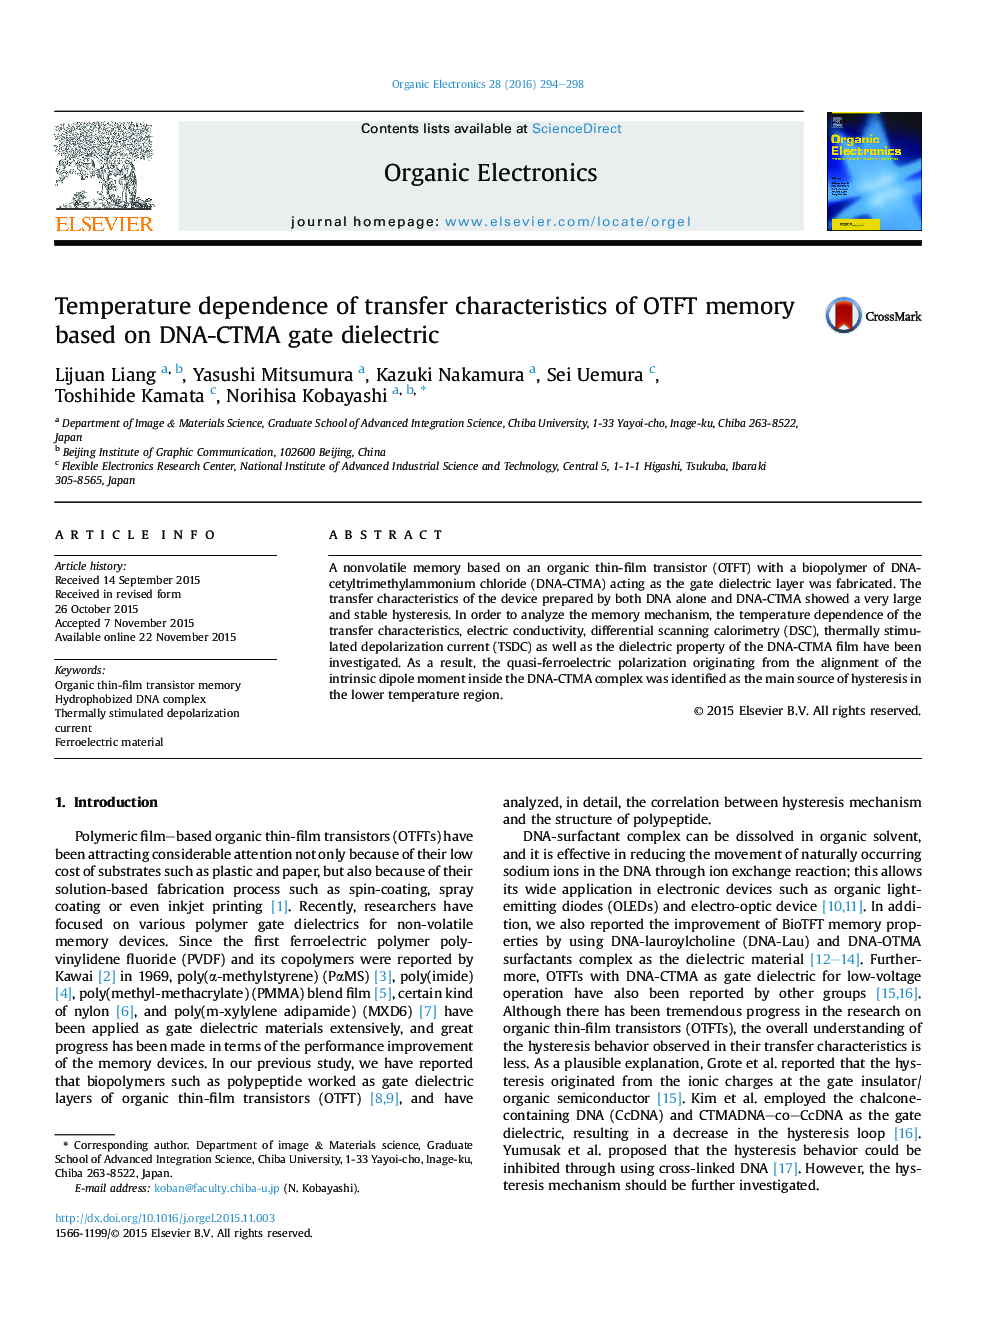 Temperature dependence of transfer characteristics of OTFT memory based on DNA-CTMA gate dielectric